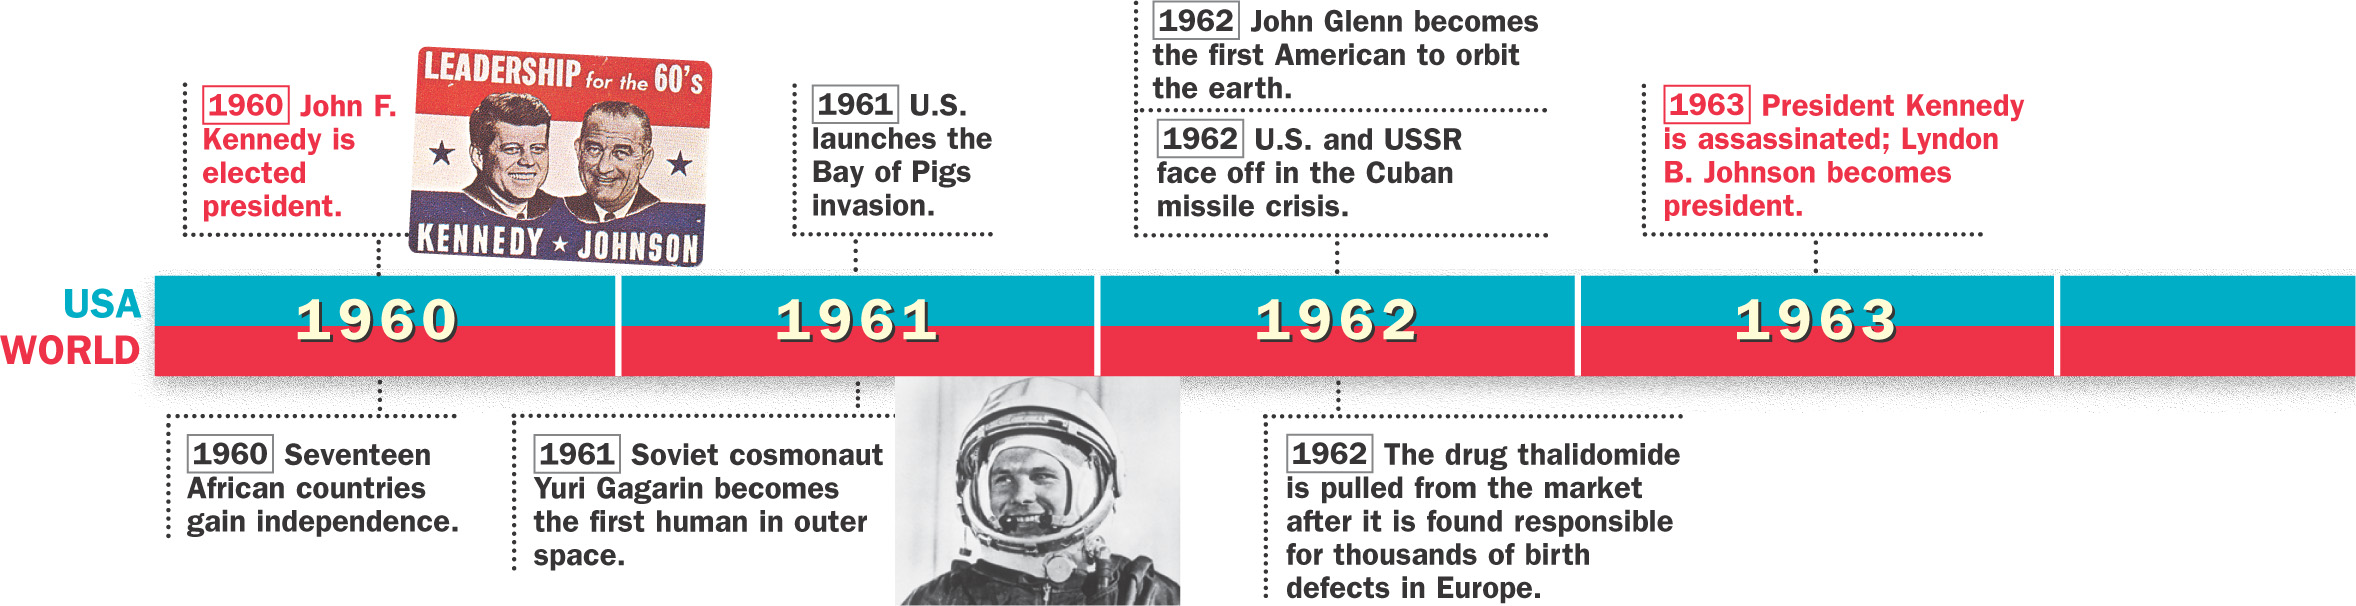 A timeline of
historical events from 1960 to 1968 in both the U.S. and the world